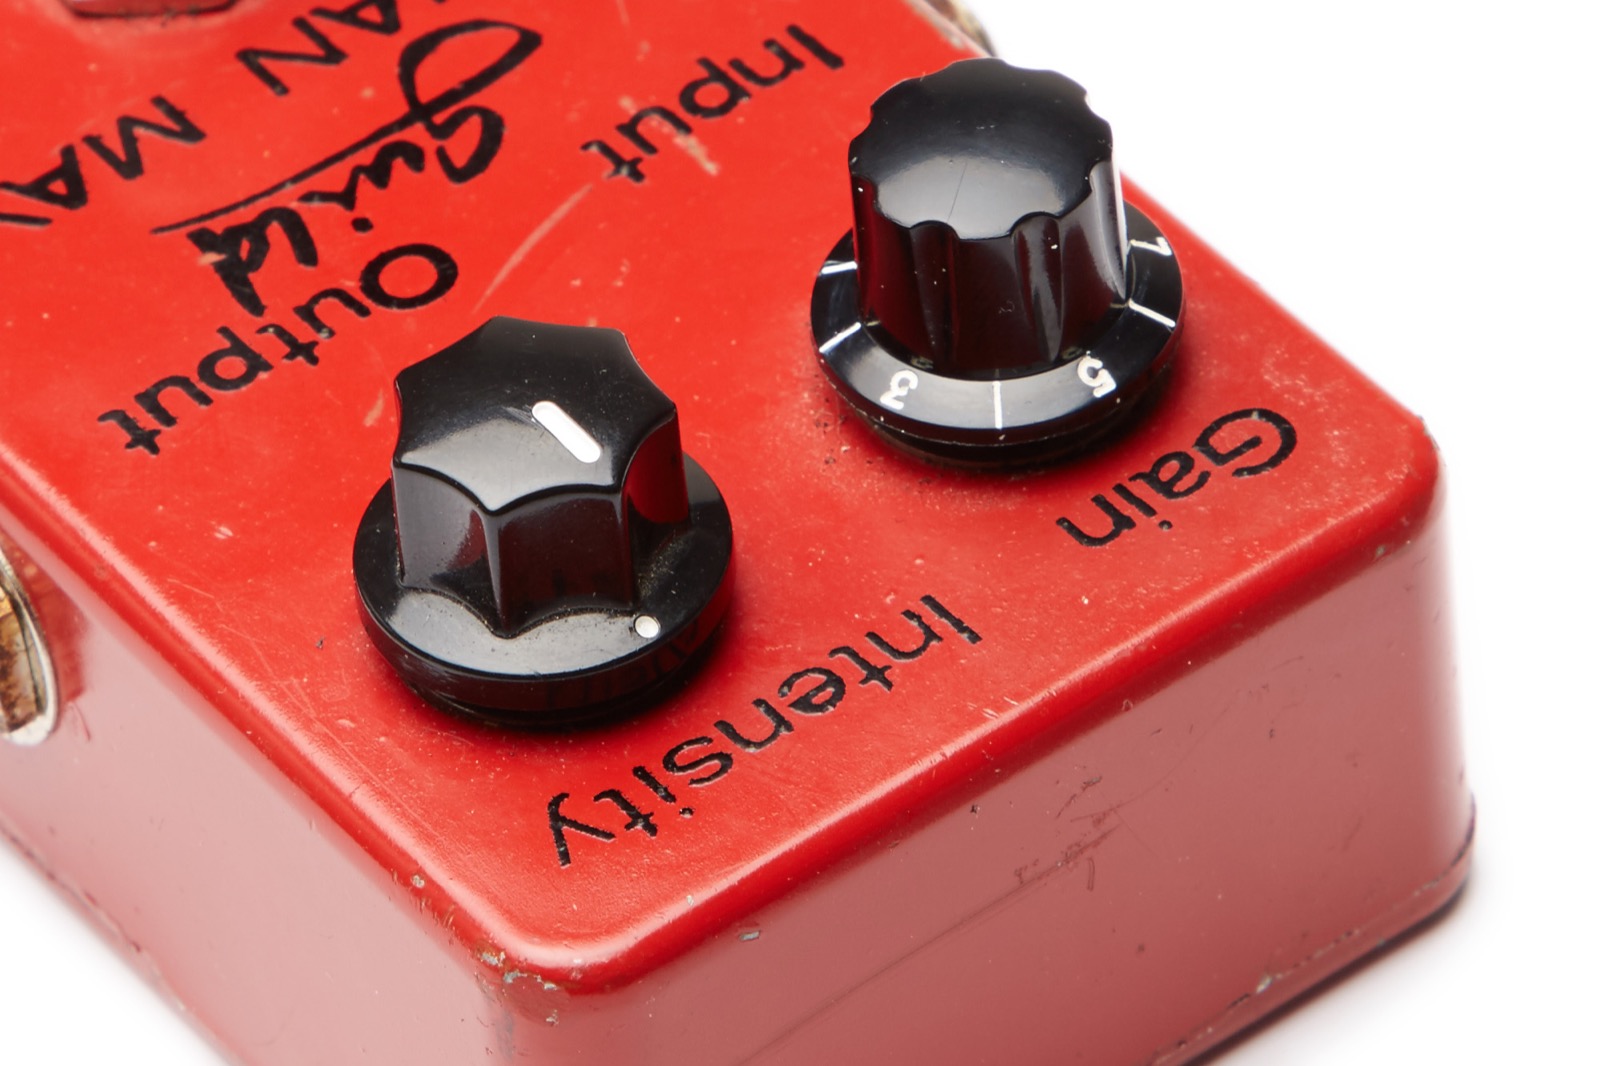 Guild-1980s-BrianMay-Pedal-Knobs.jpg